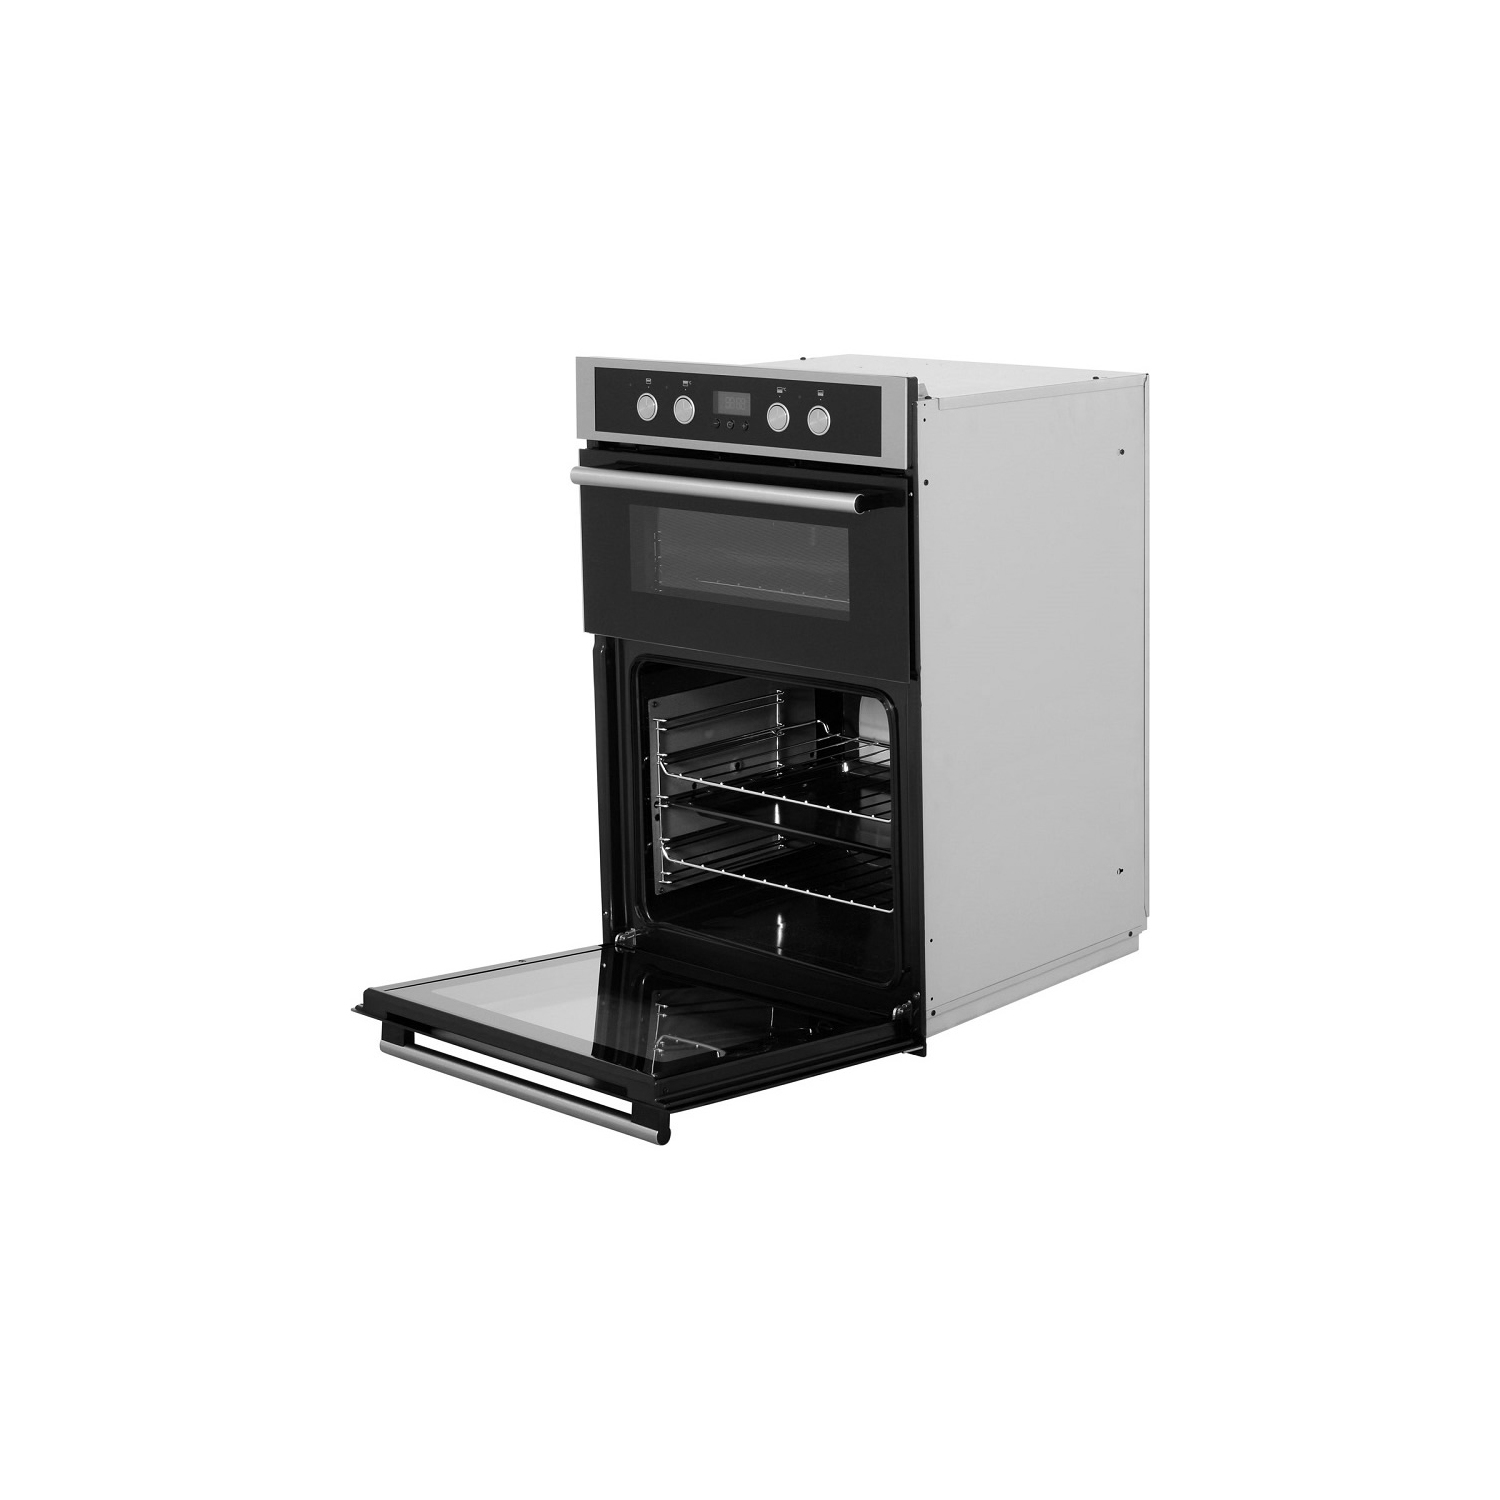 Hotpoint Built In Double Oven (black - A/A energy rating) - 1